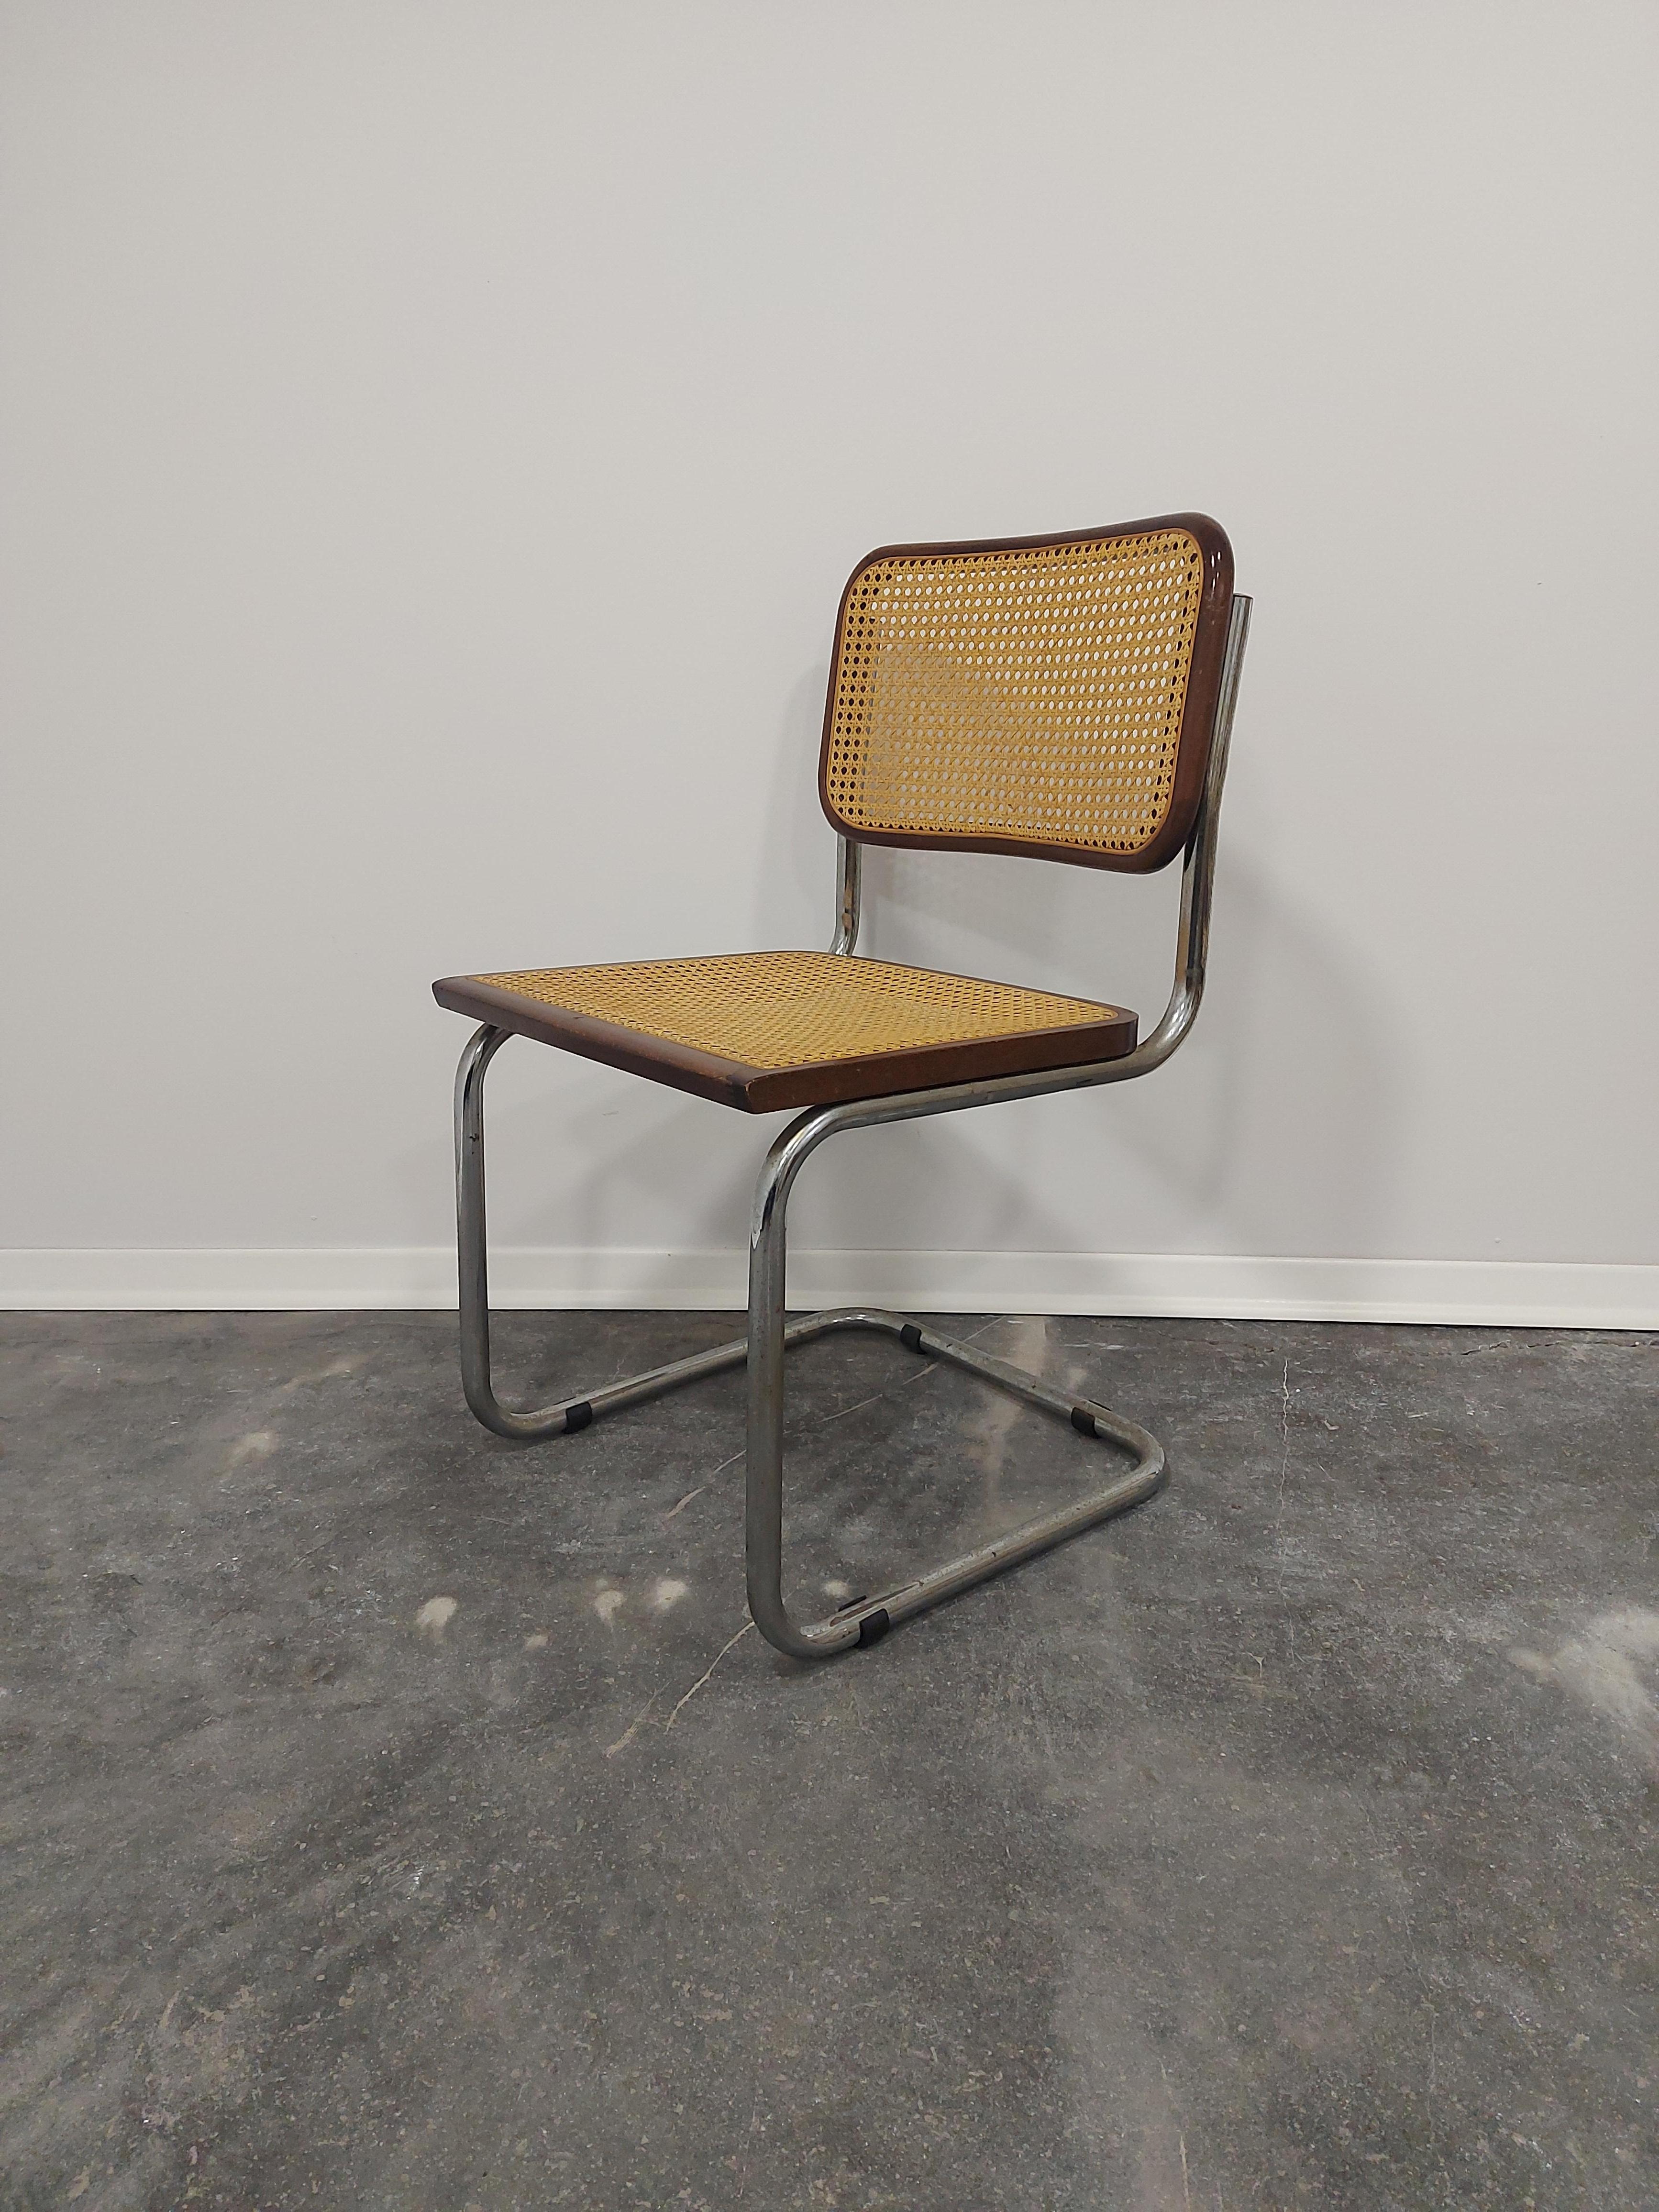 Cane Cesca Chair by Marcel Breuer 1970s B32 1 of 5 For Sale